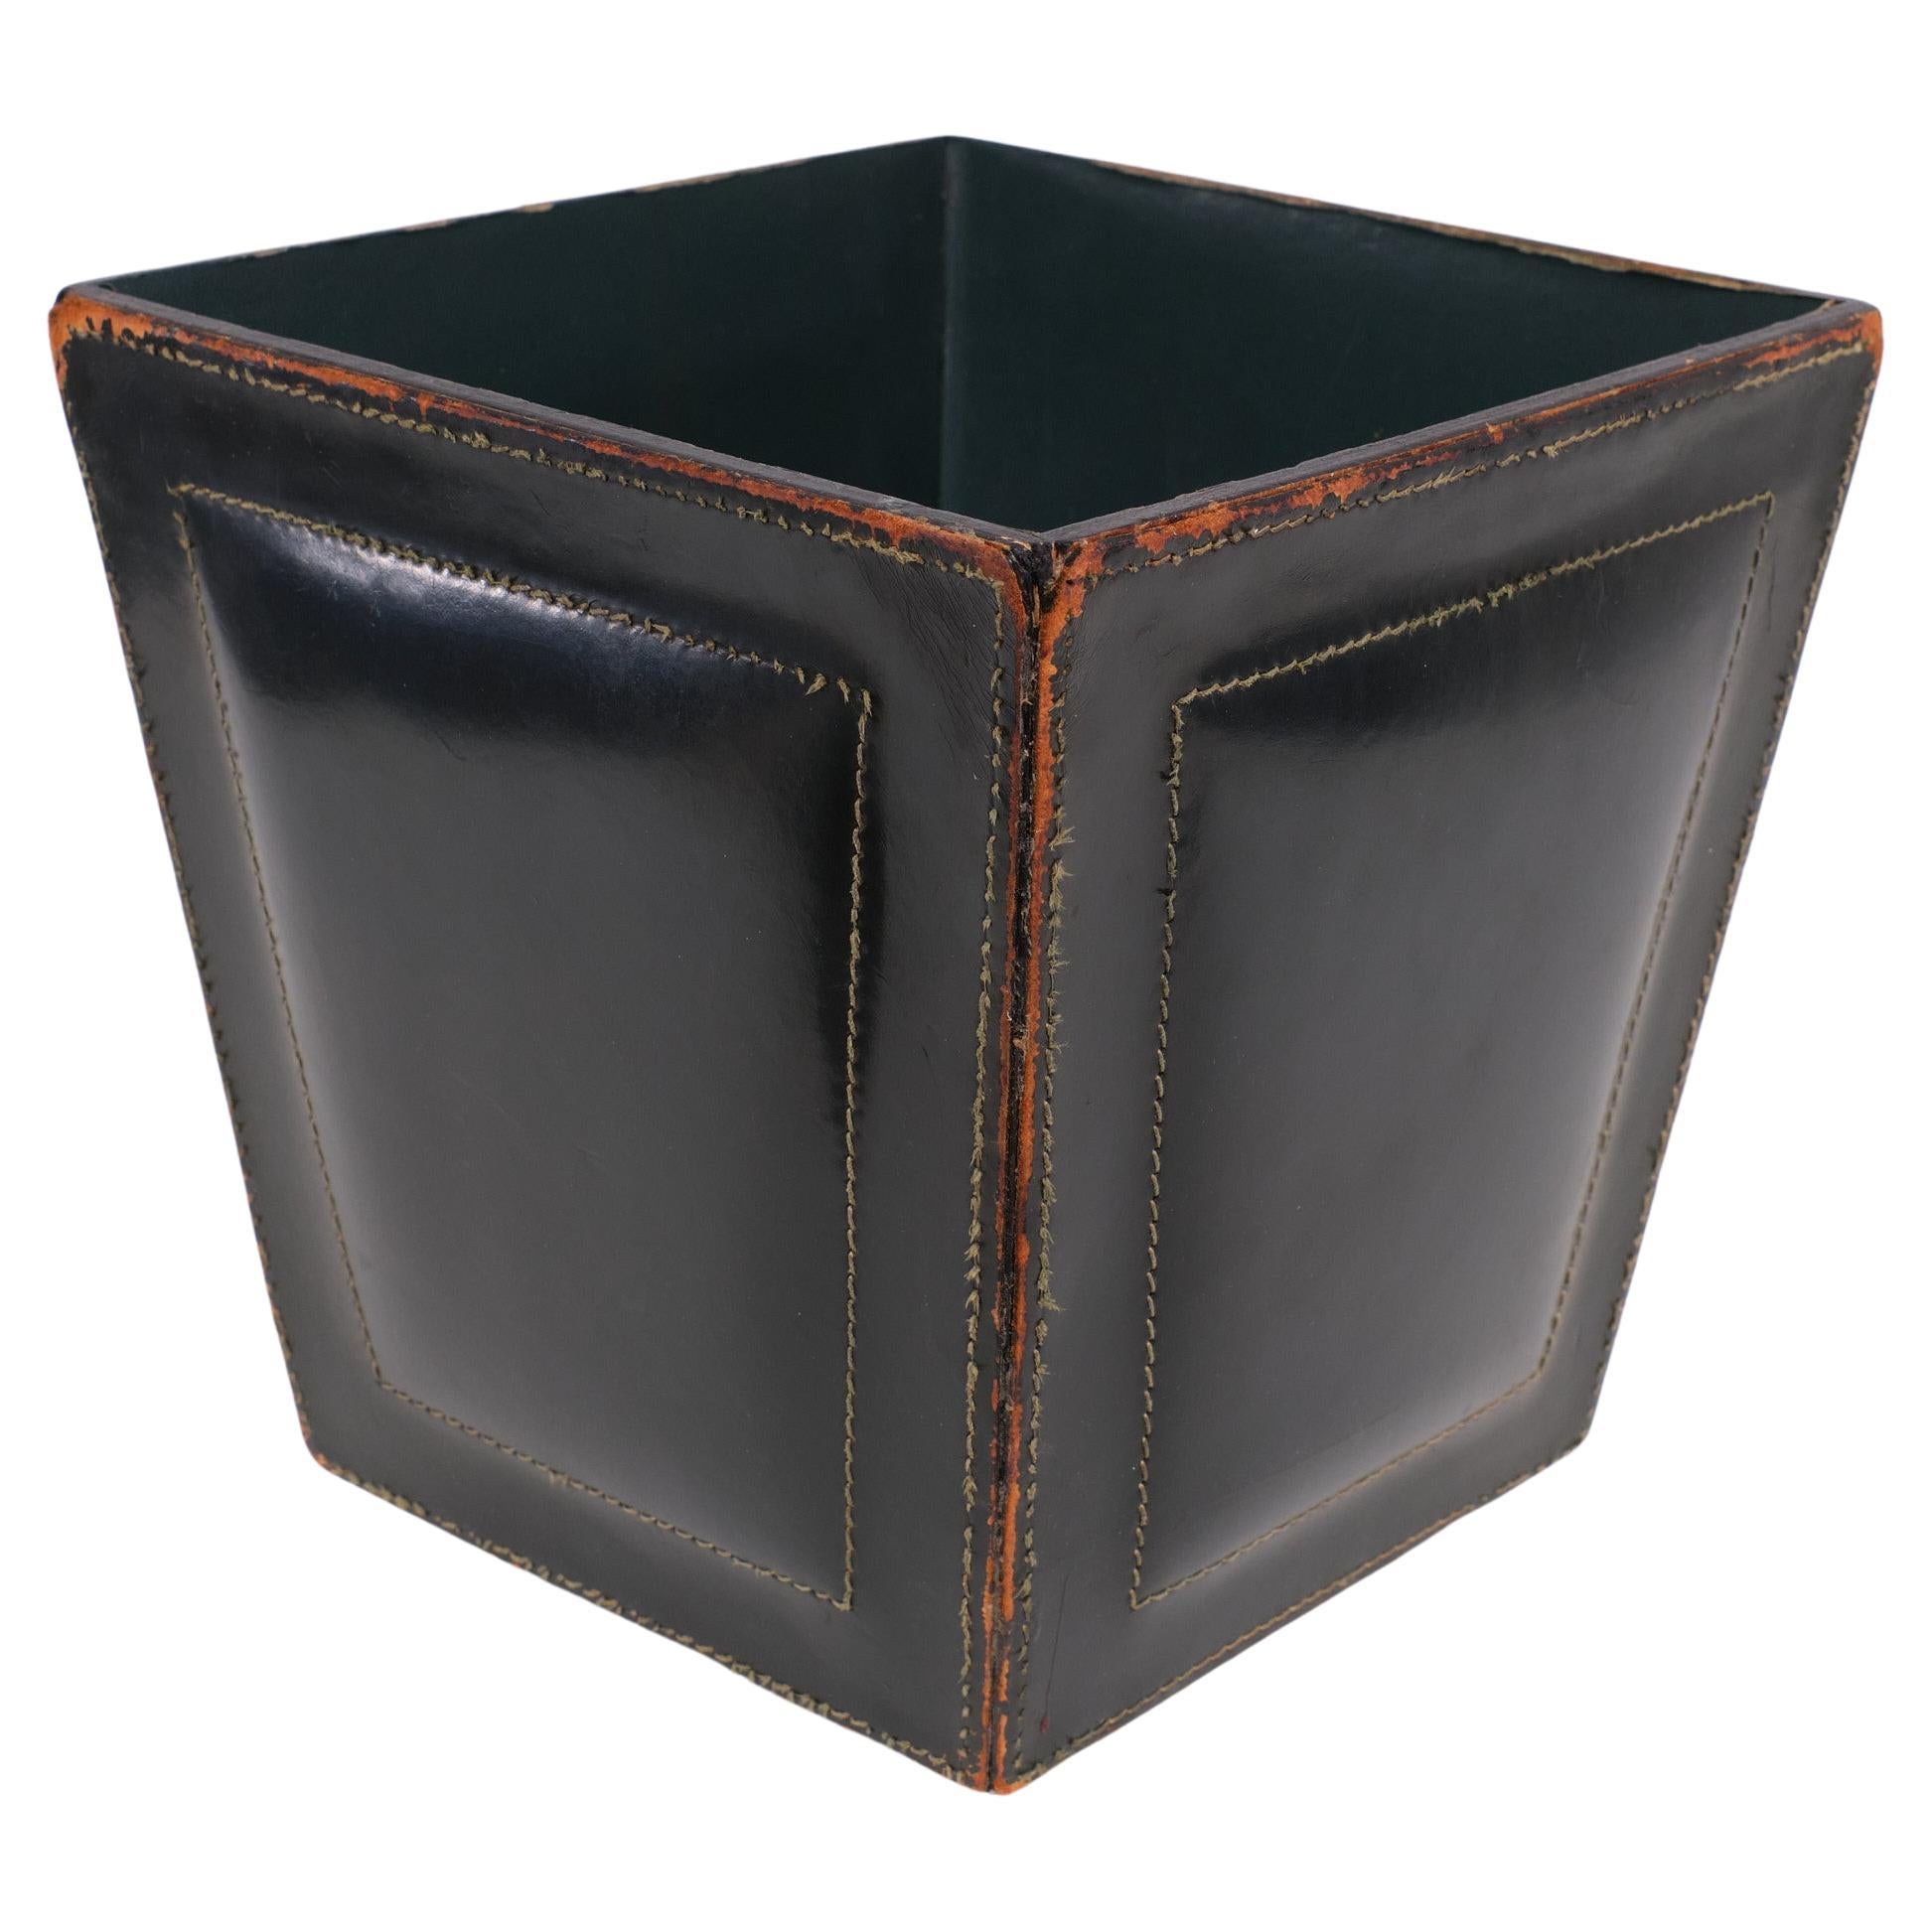 Stich Leather waste basket attrib Jacques Adnet   1950s France  For Sale